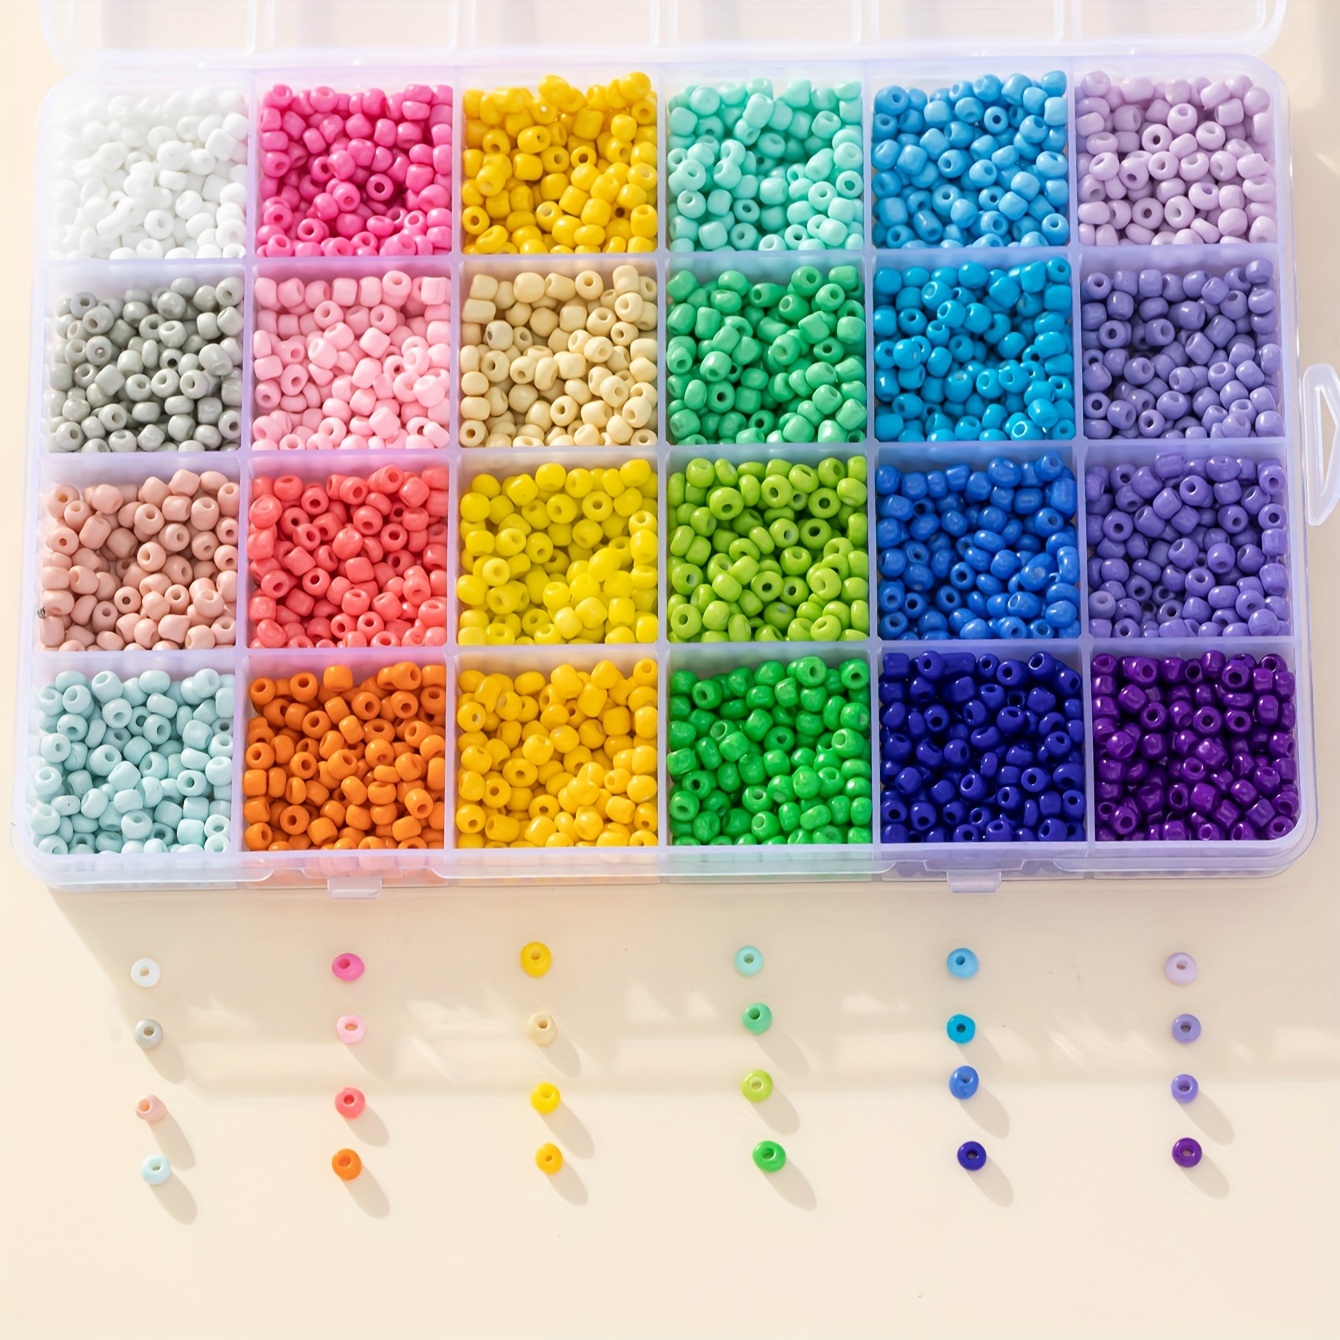 

7600pcs 24 Colors 3mm/4mm Glass Beads Kit For Jewelry Making